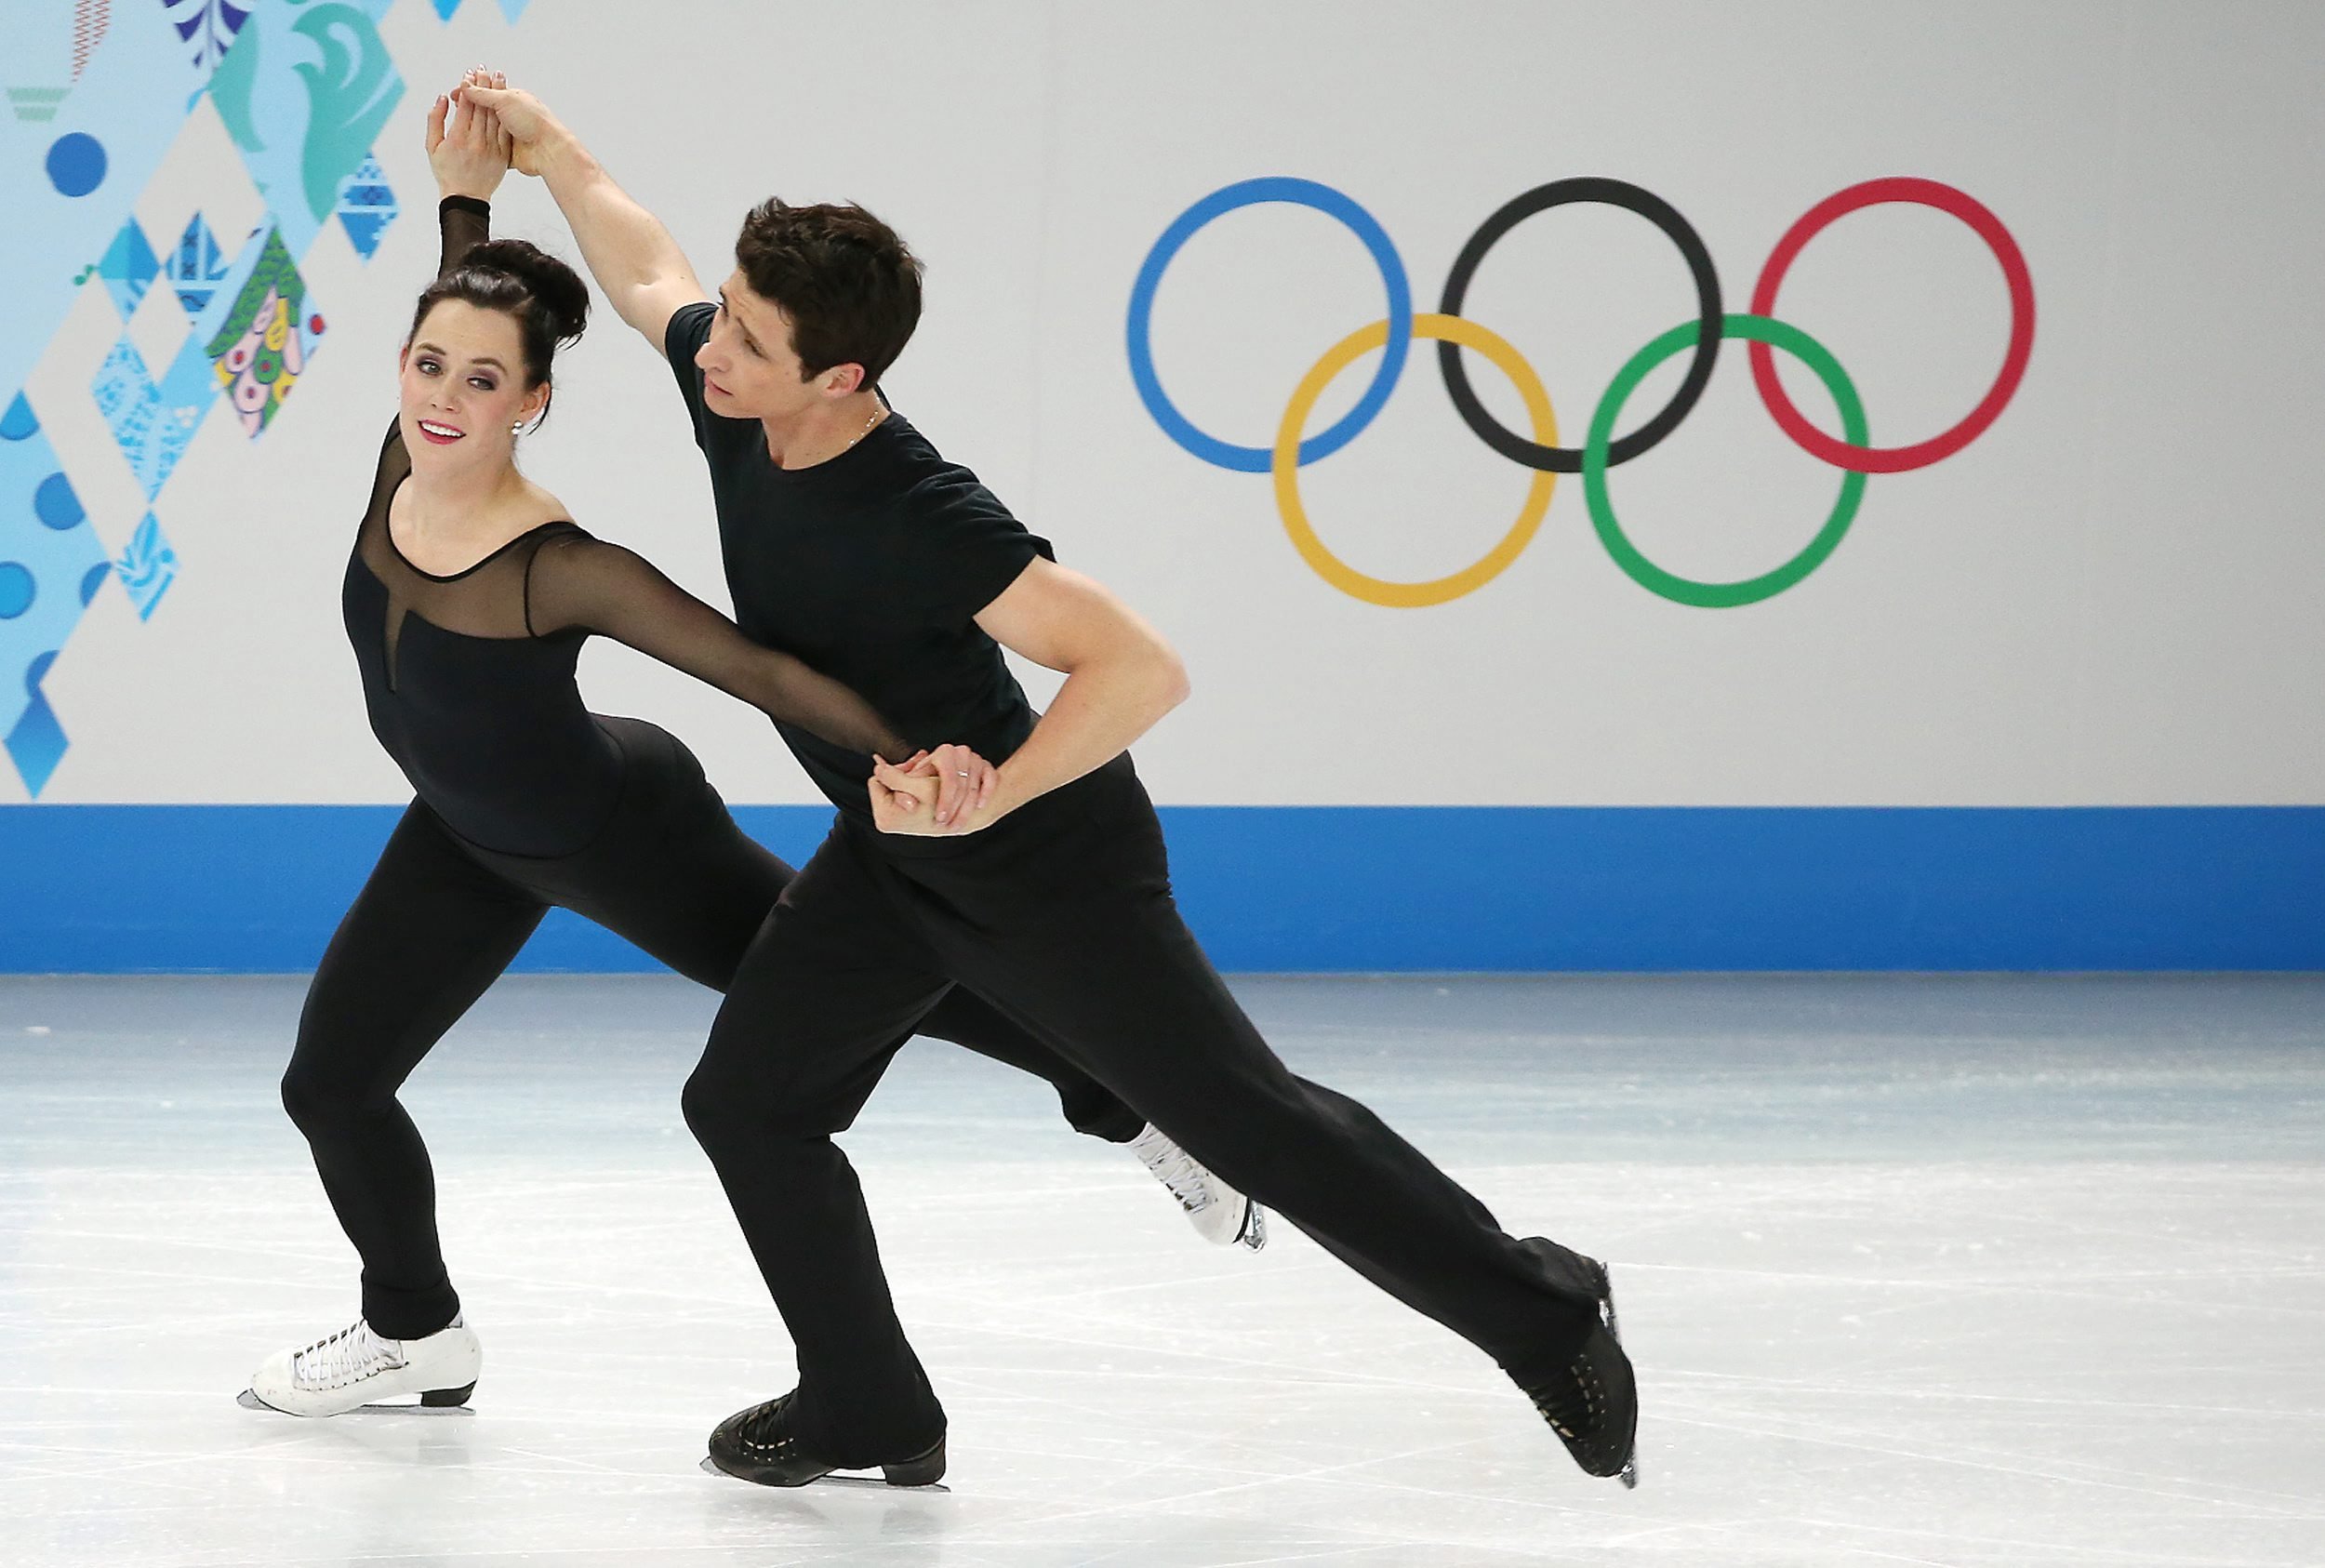 Tessa Virtue and Scott Moir of Canada perform during an ice dance figure skating training session at Iceberg Skating Palace during the Sochi 2014 Olympic Games, February 5, 2014. (How Hwee Young / EPA)